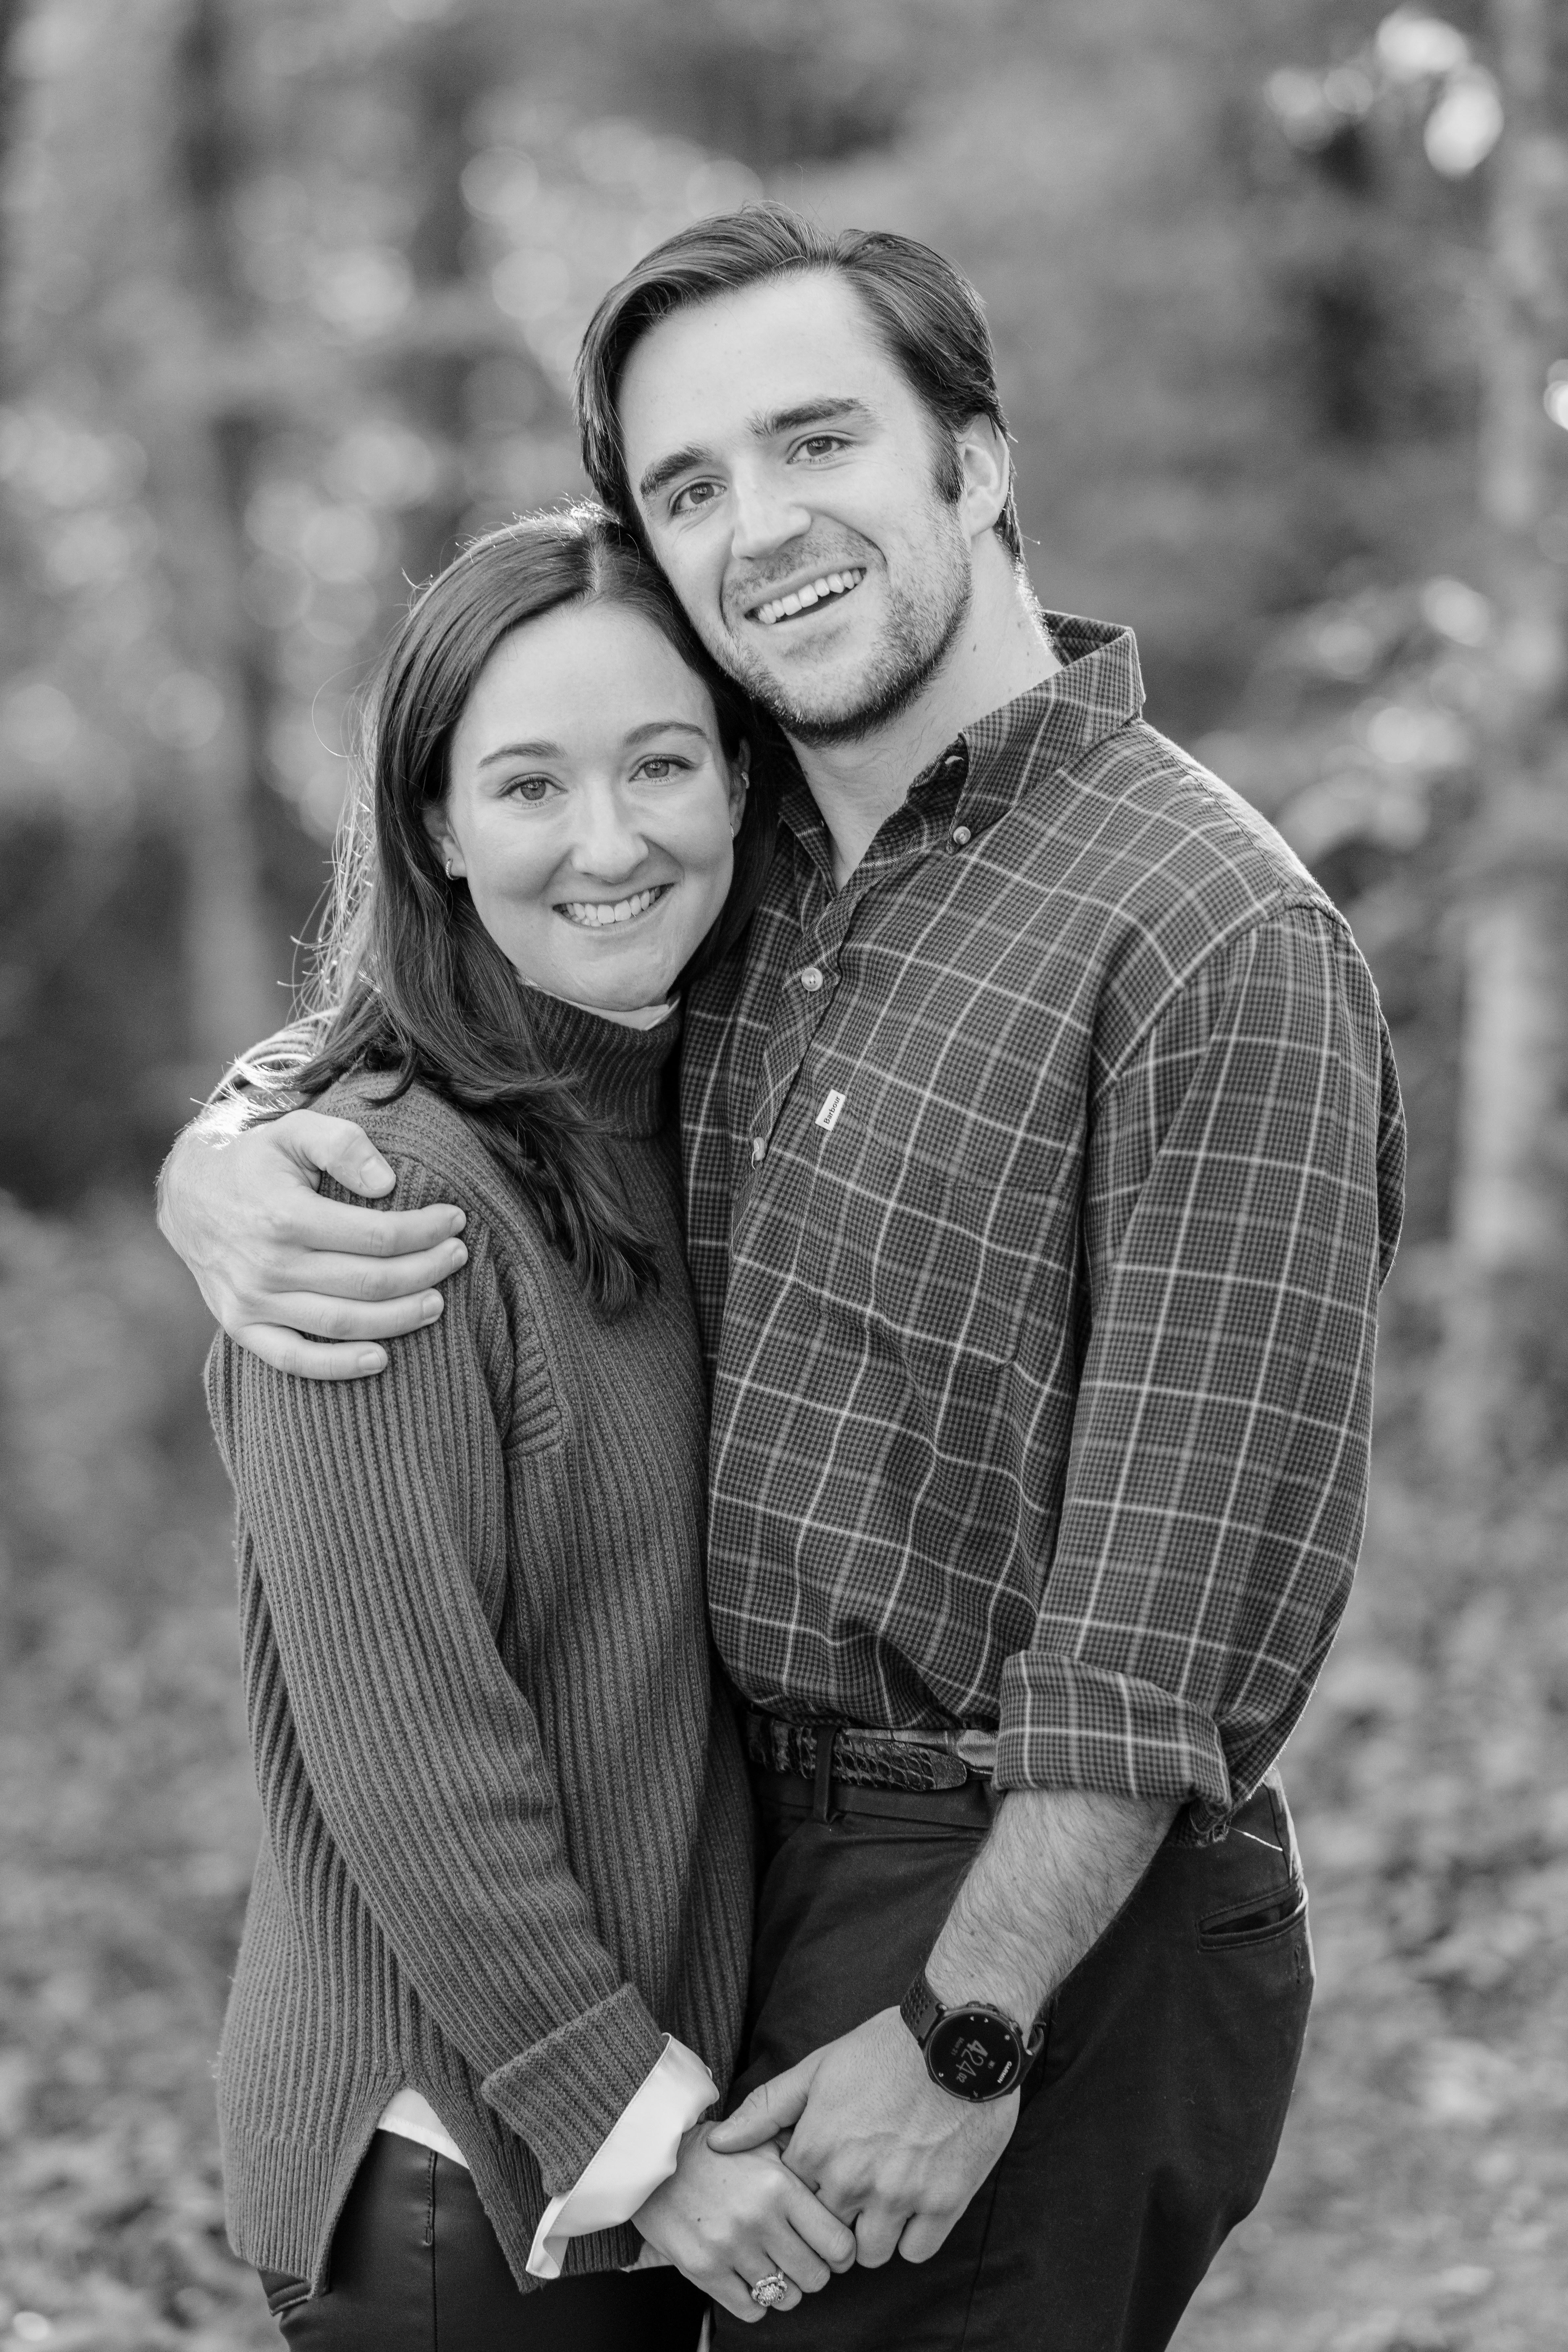 The Wedding Website of Ruthie Flowers and Tyler Gabrielson